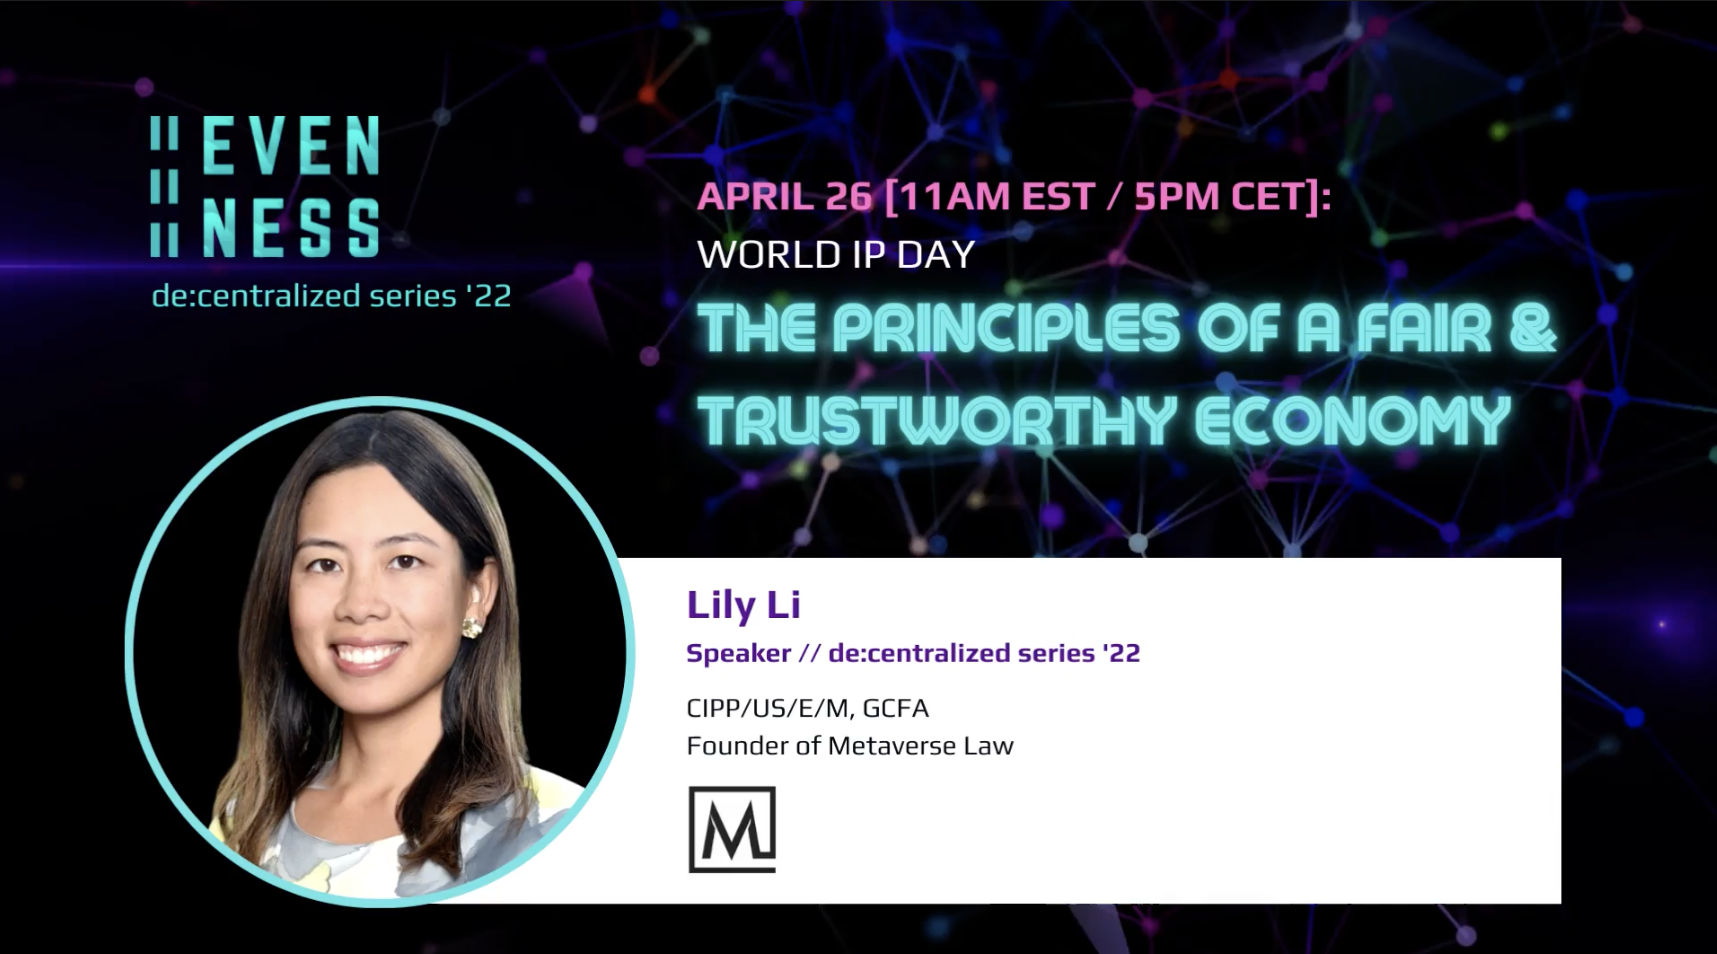 Image of Lily Li, Founder of Metaverse Law and time and date for Evenness' de:centralized series '22 event "The Principles of a Fair & Trustworthy Economy."